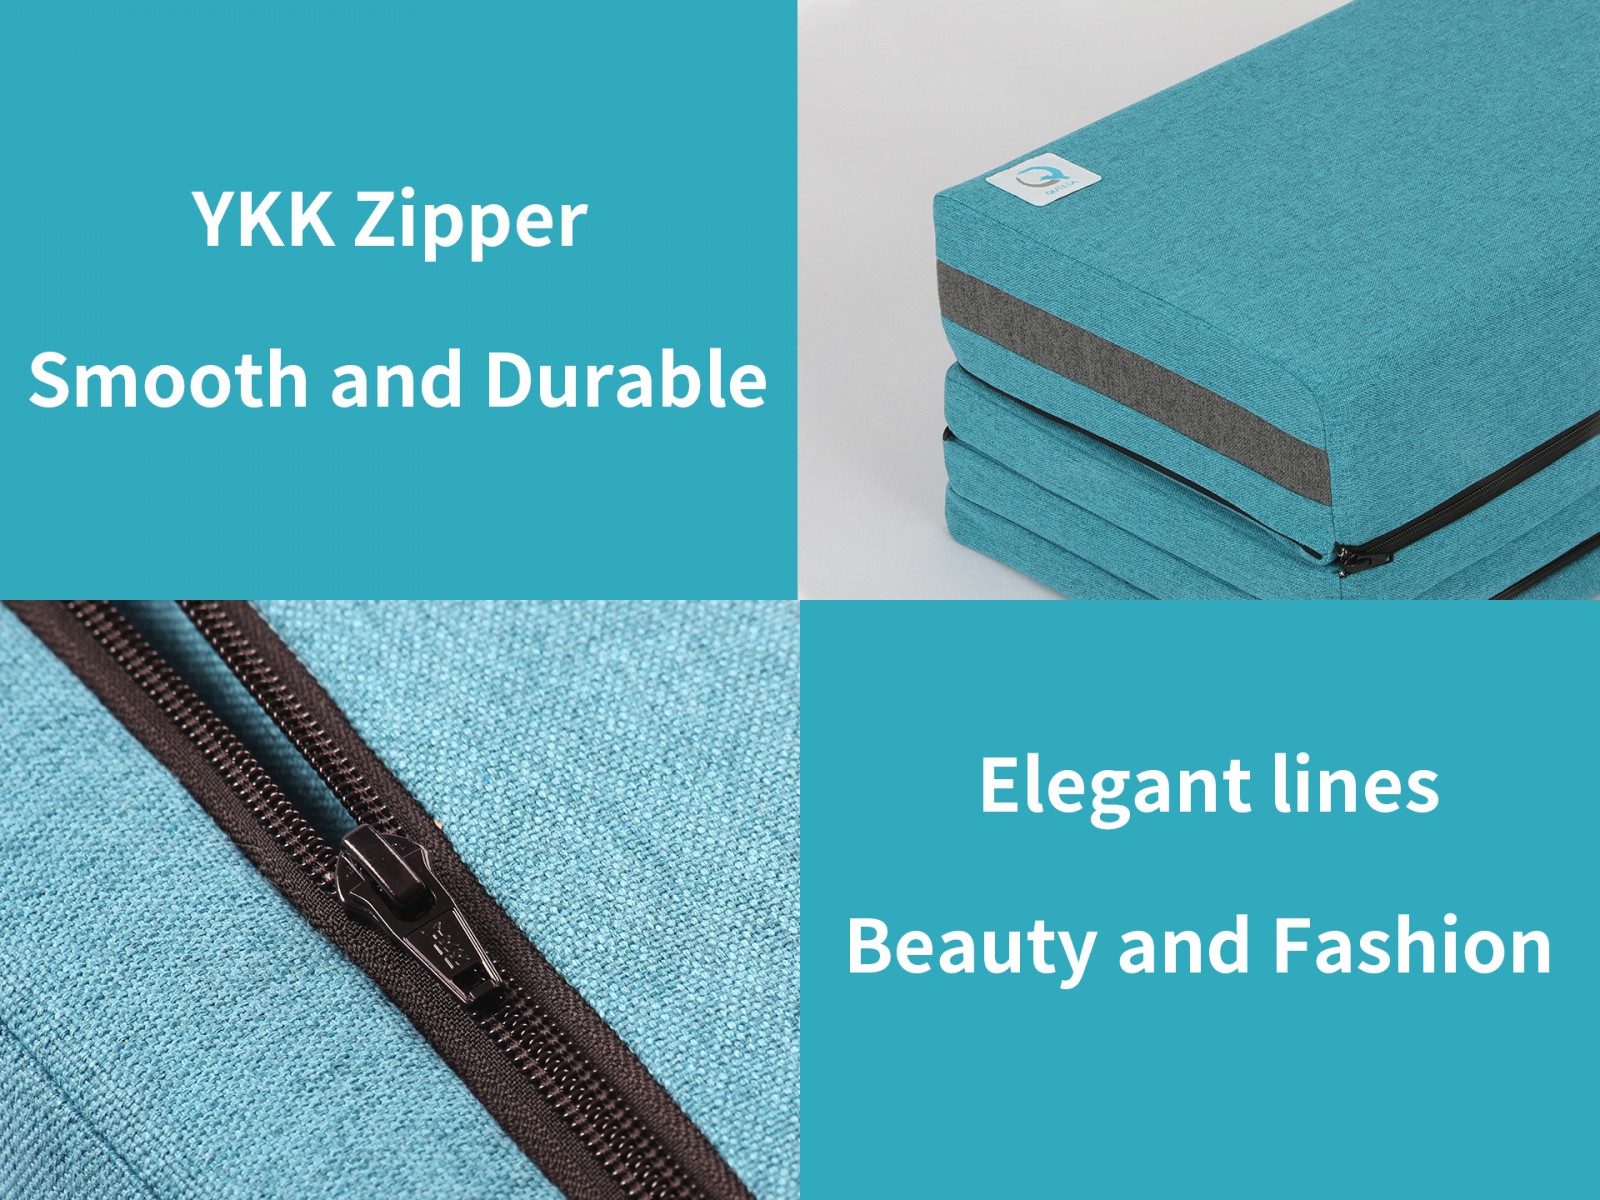 YKK zipper Smooth and Durable for meditation cushion